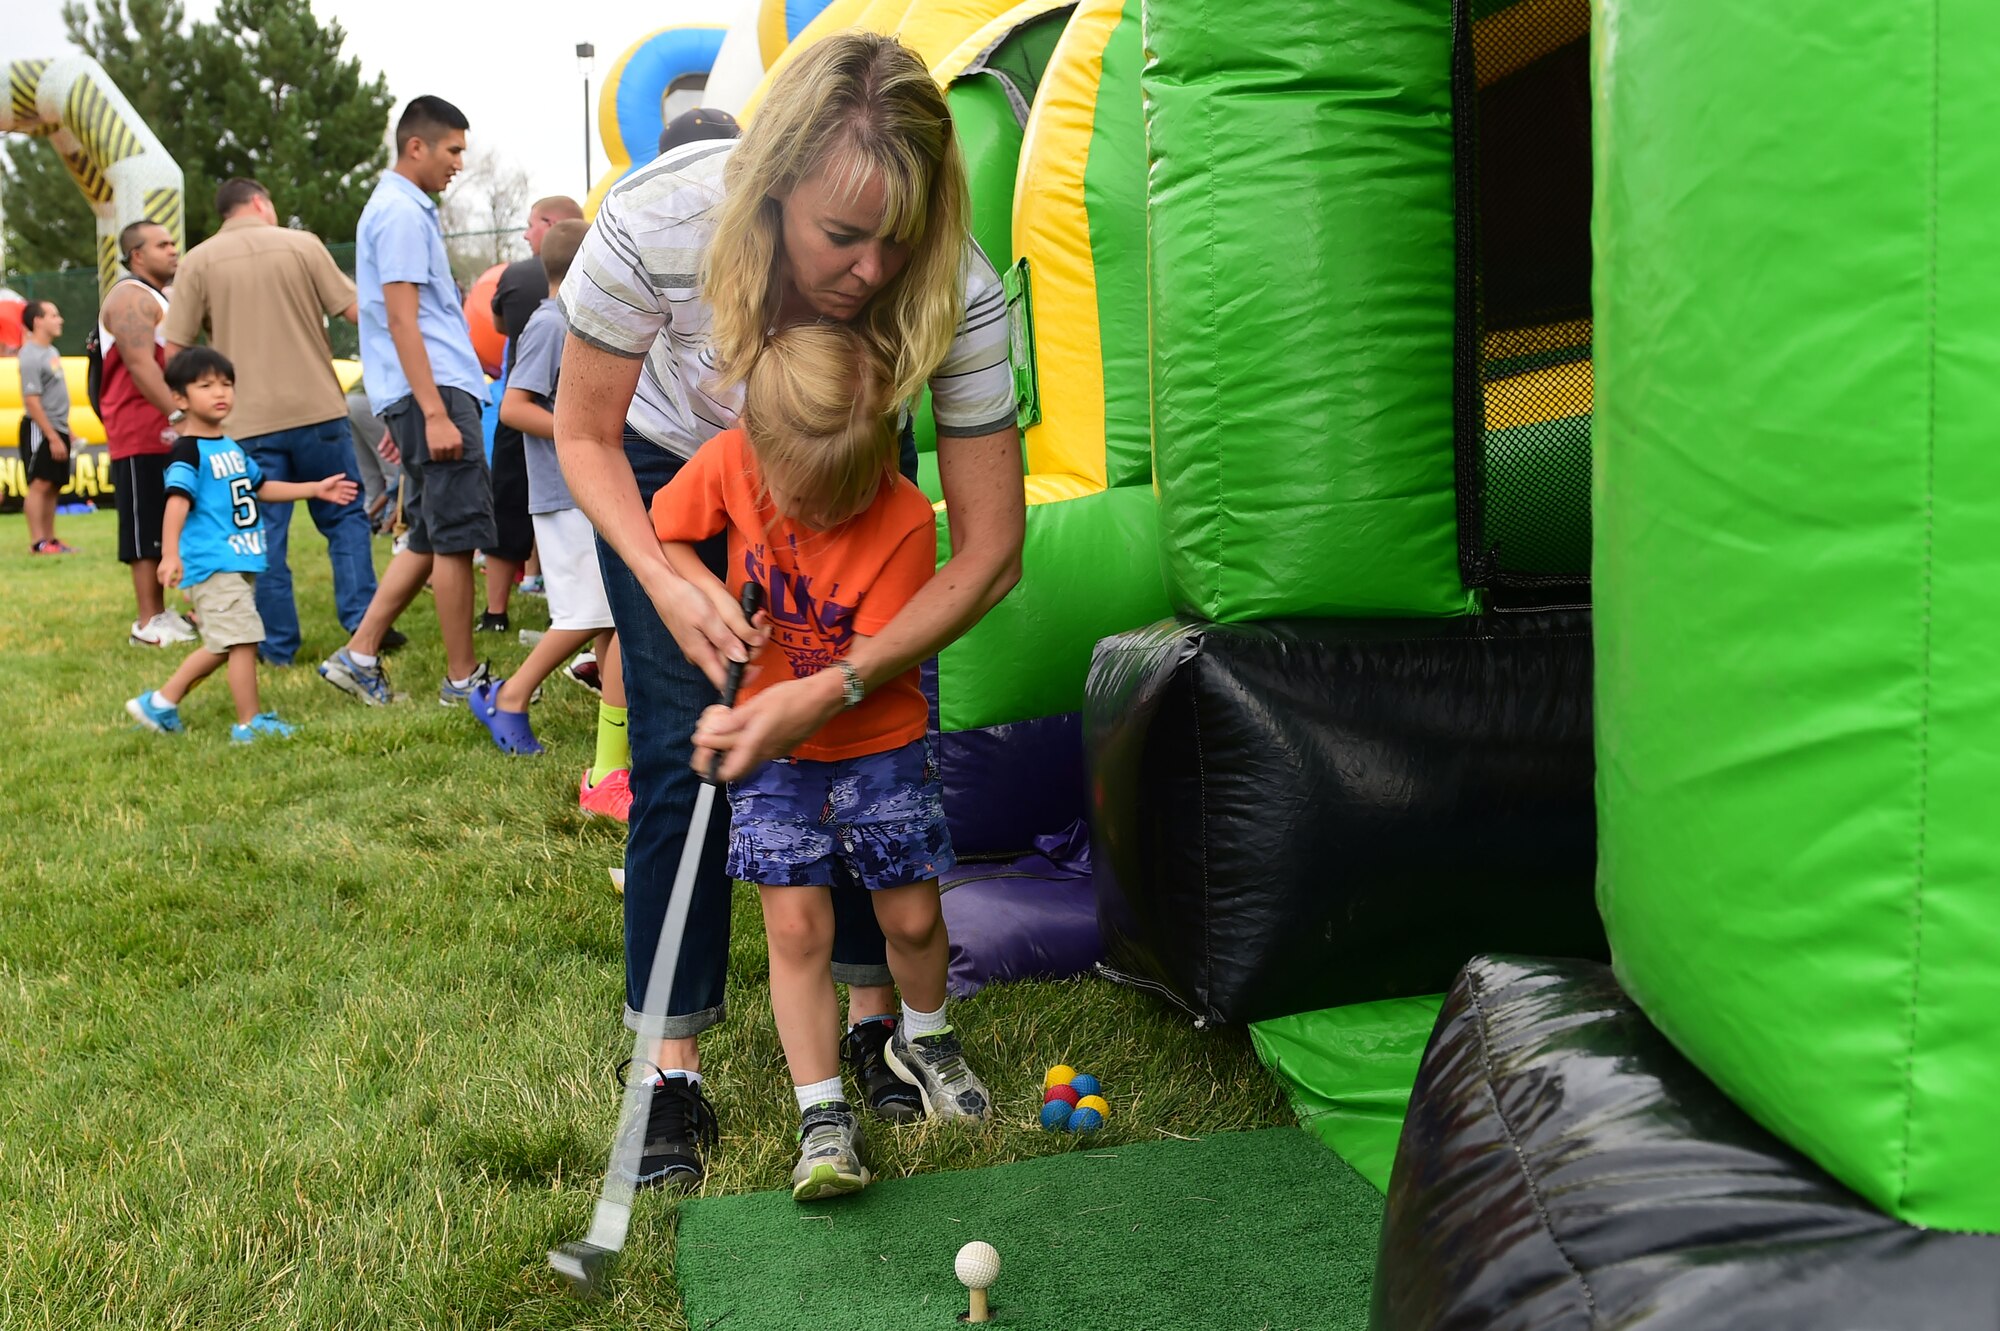 A mother helps her daughter hit a golf ball during FunFest July 24, 2015, at Buckley Air Force Base, Colo. FunFest is an annual base-wide event that includes family-friendly games and activities, community involvement and local business sponsors. (U.S. Air Force photo by Airman 1st Class Luke W. Nowakowski/Released)